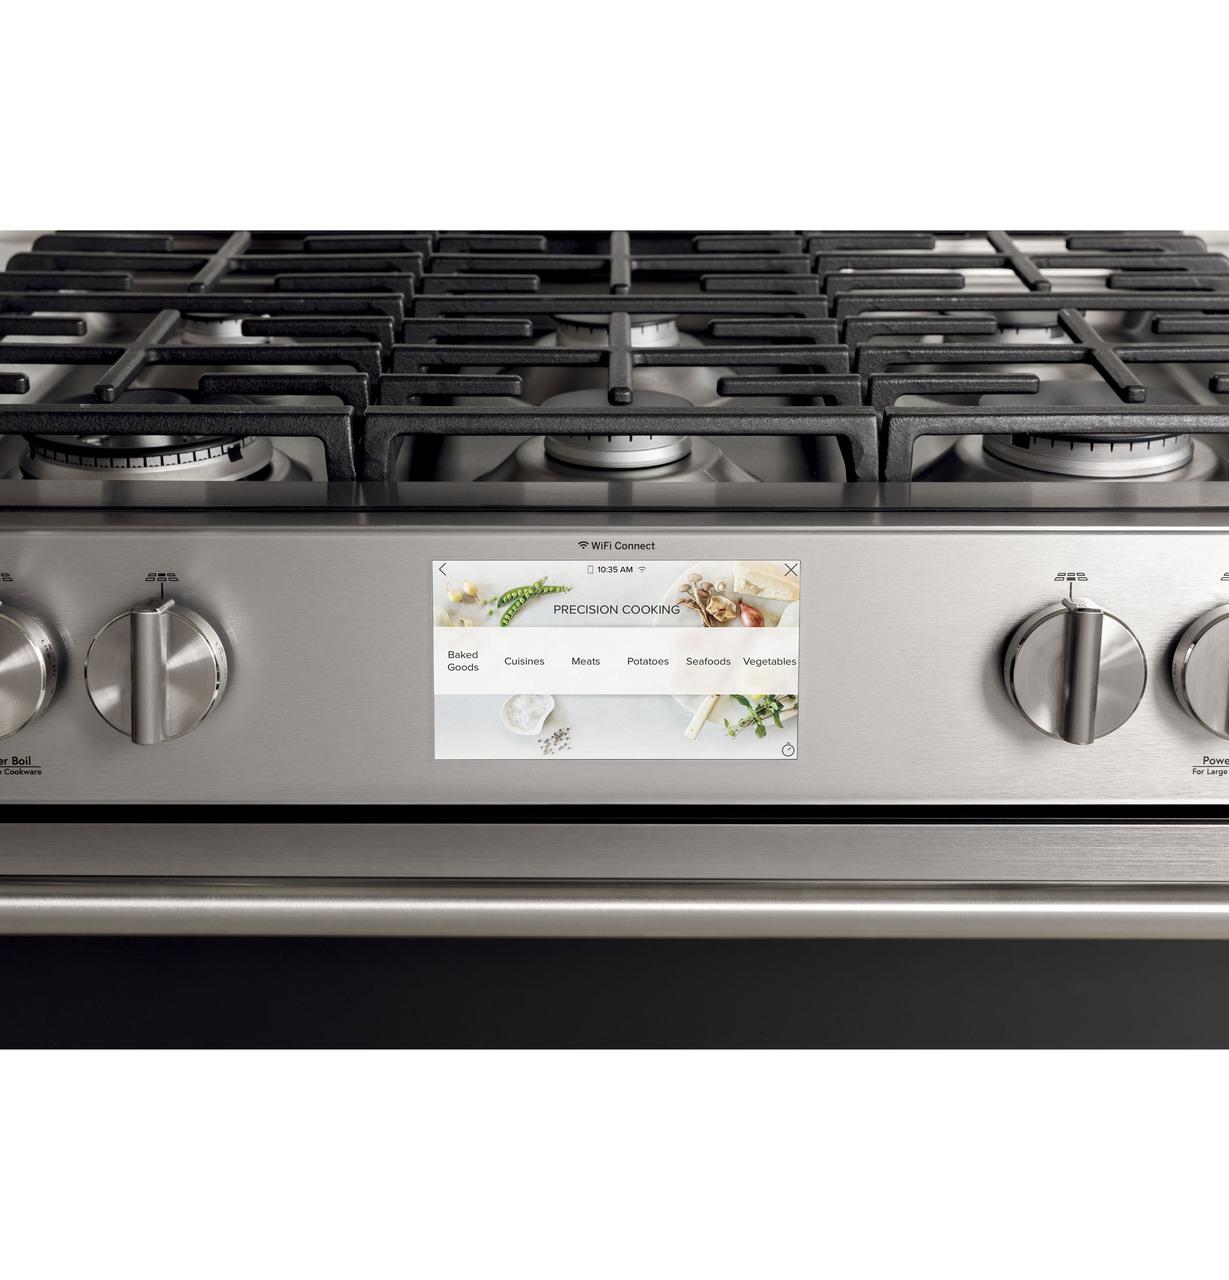 Caf(eback)™ 30" Smart Slide-In, Front-Control, Dual-Fuel, Double-Oven Range with Convection in Platinum Glass